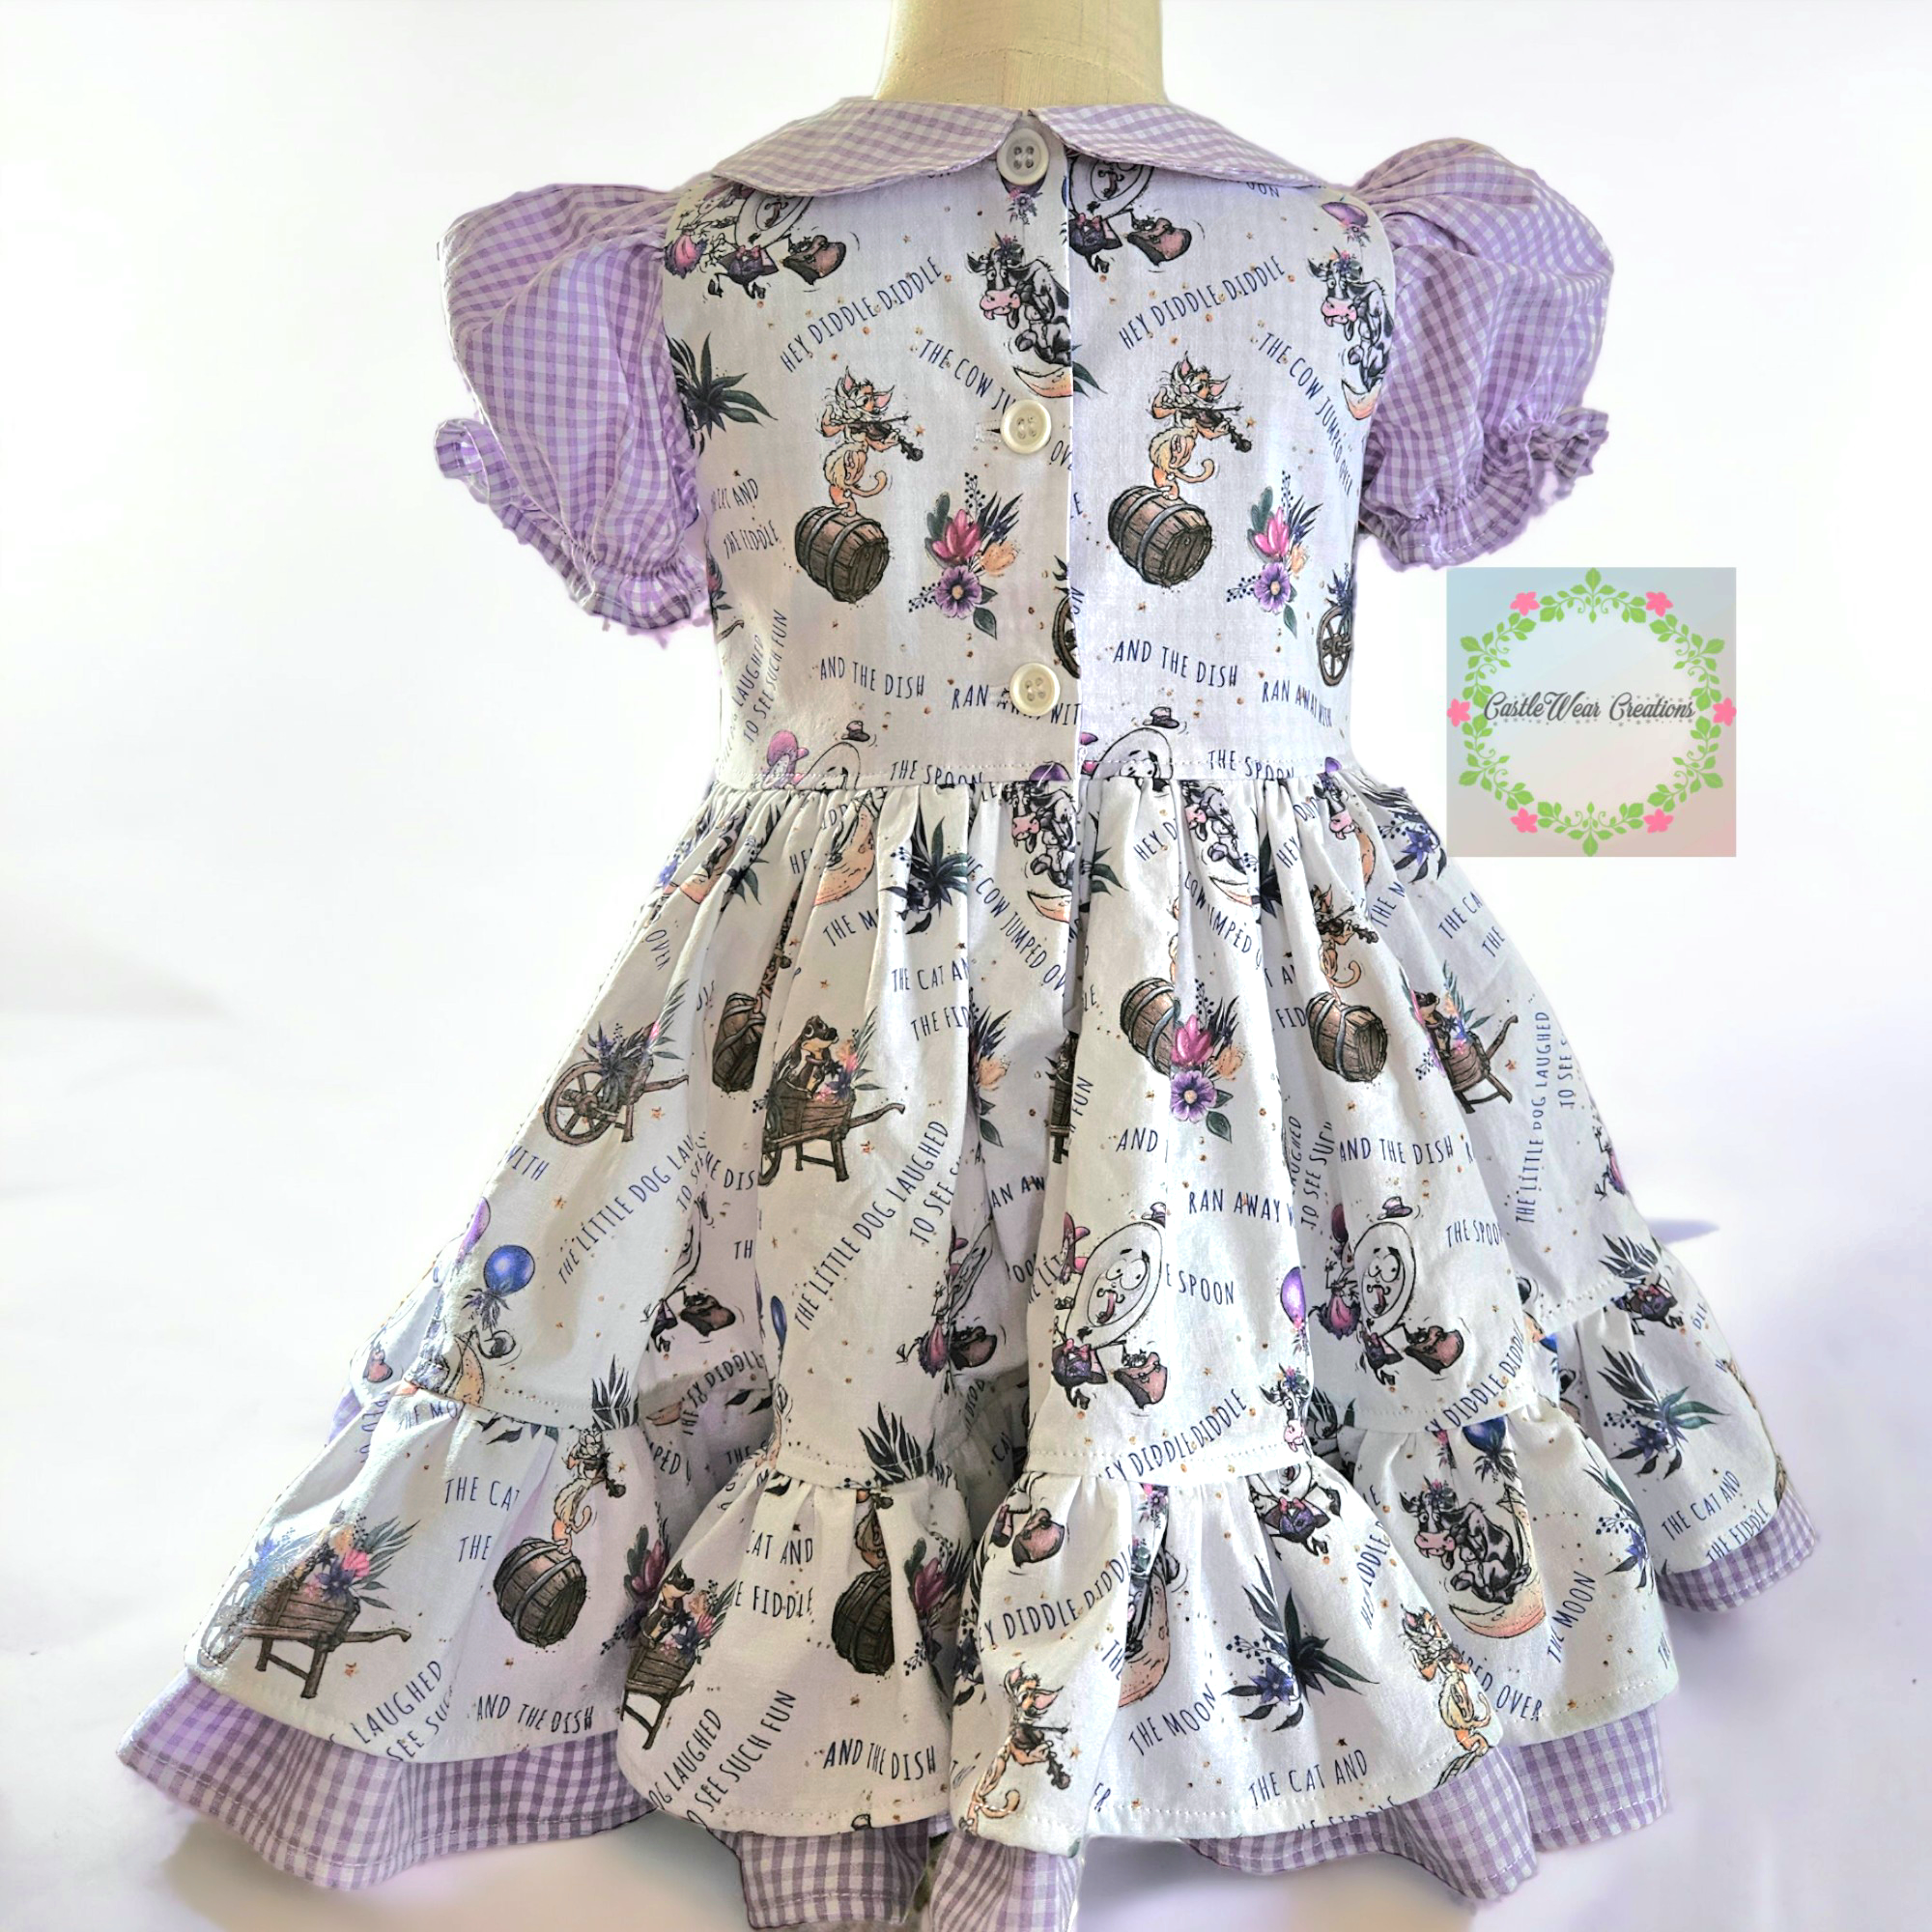 The Little Dog Laughed Dress